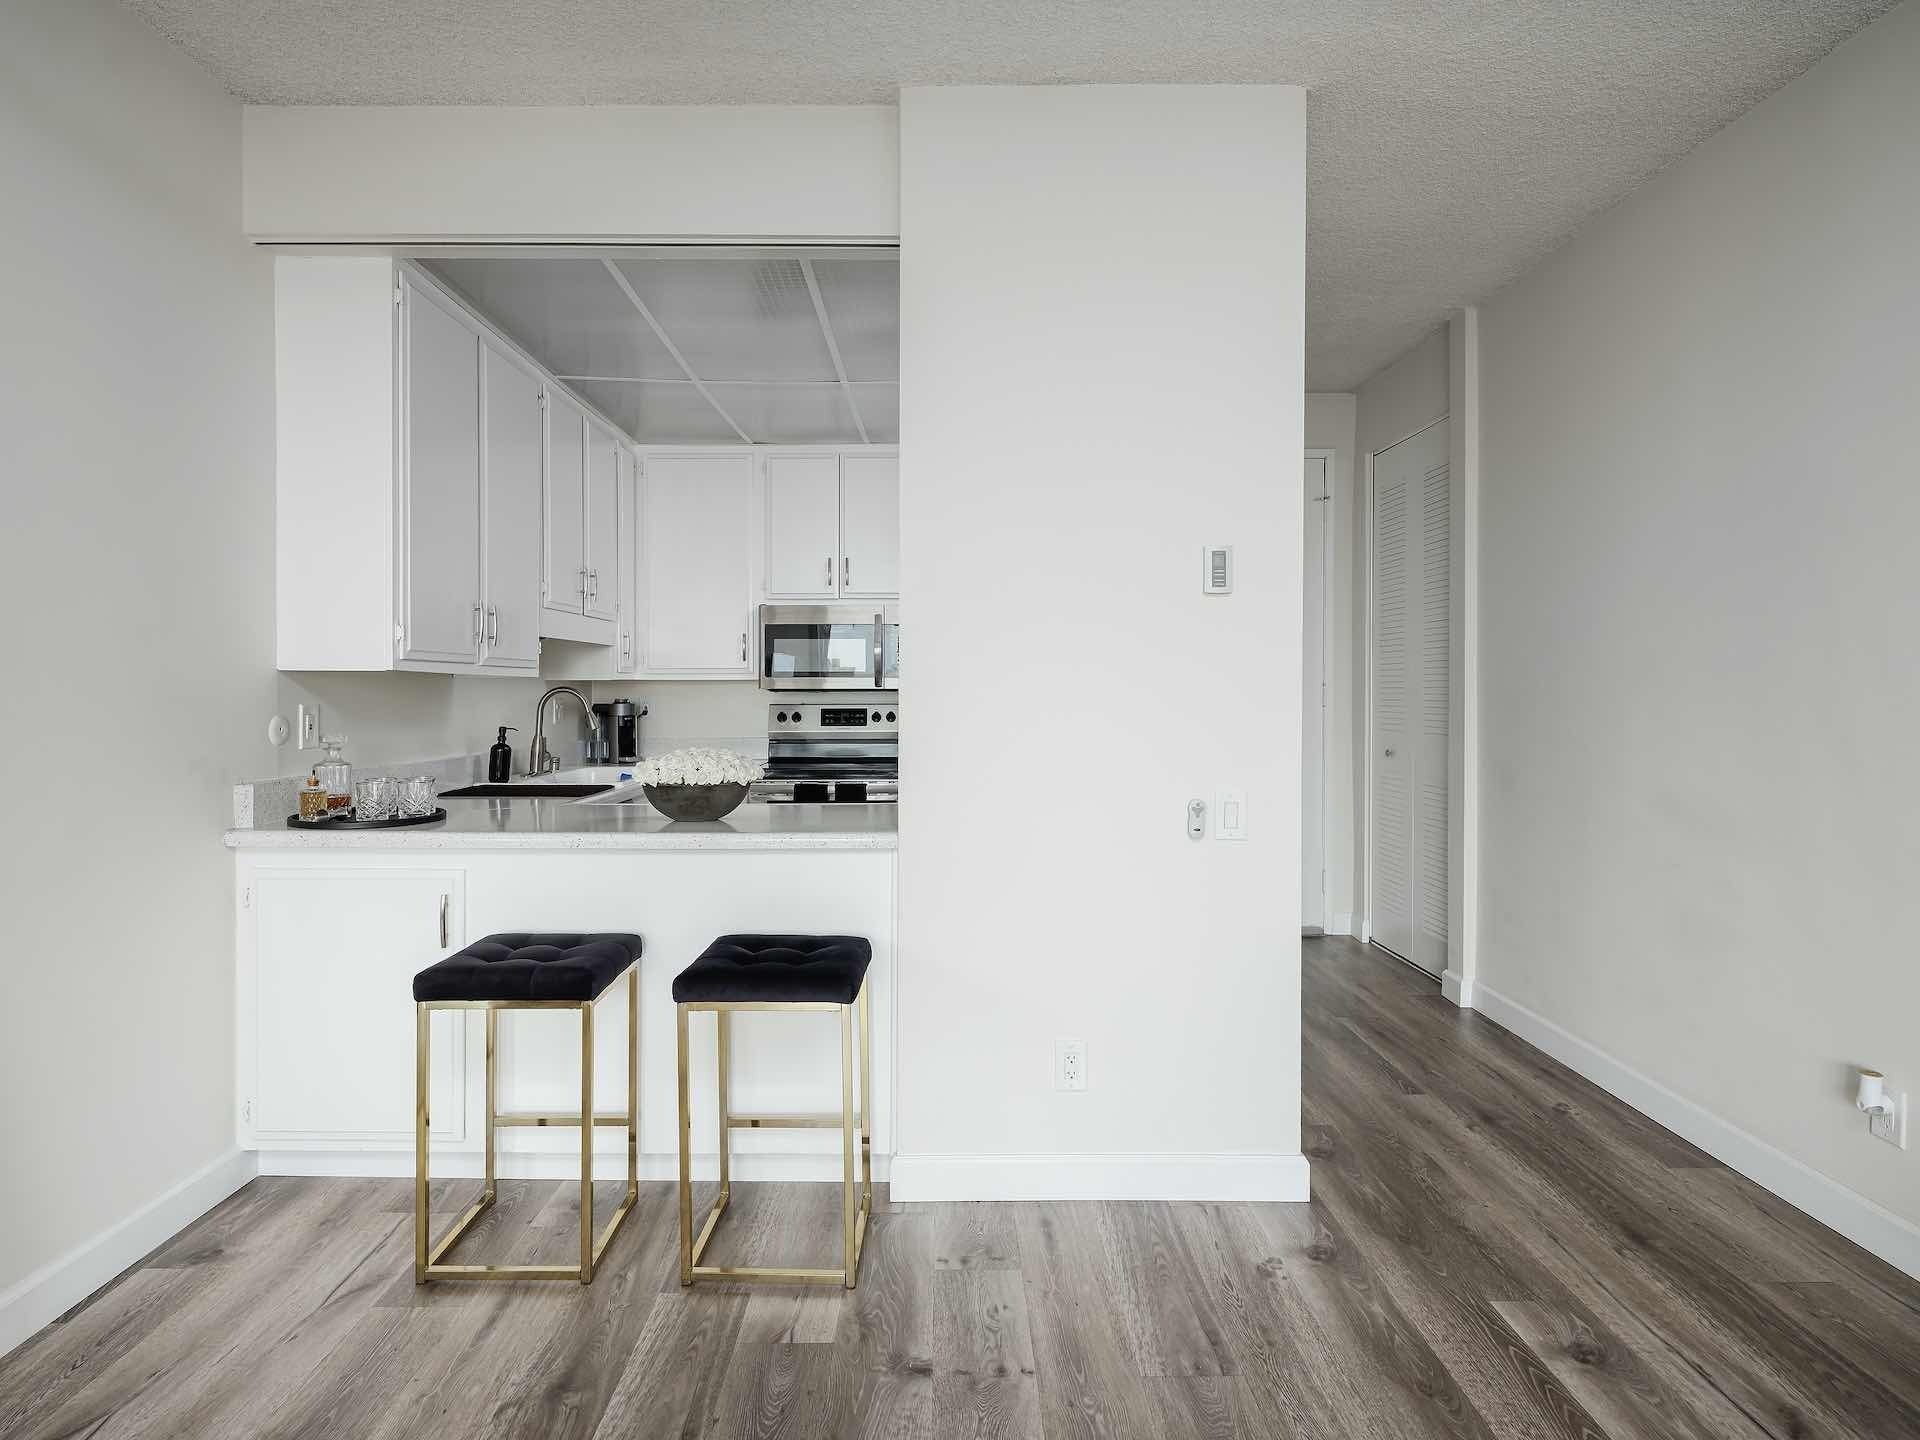 Kitchen island and entryway to apartment